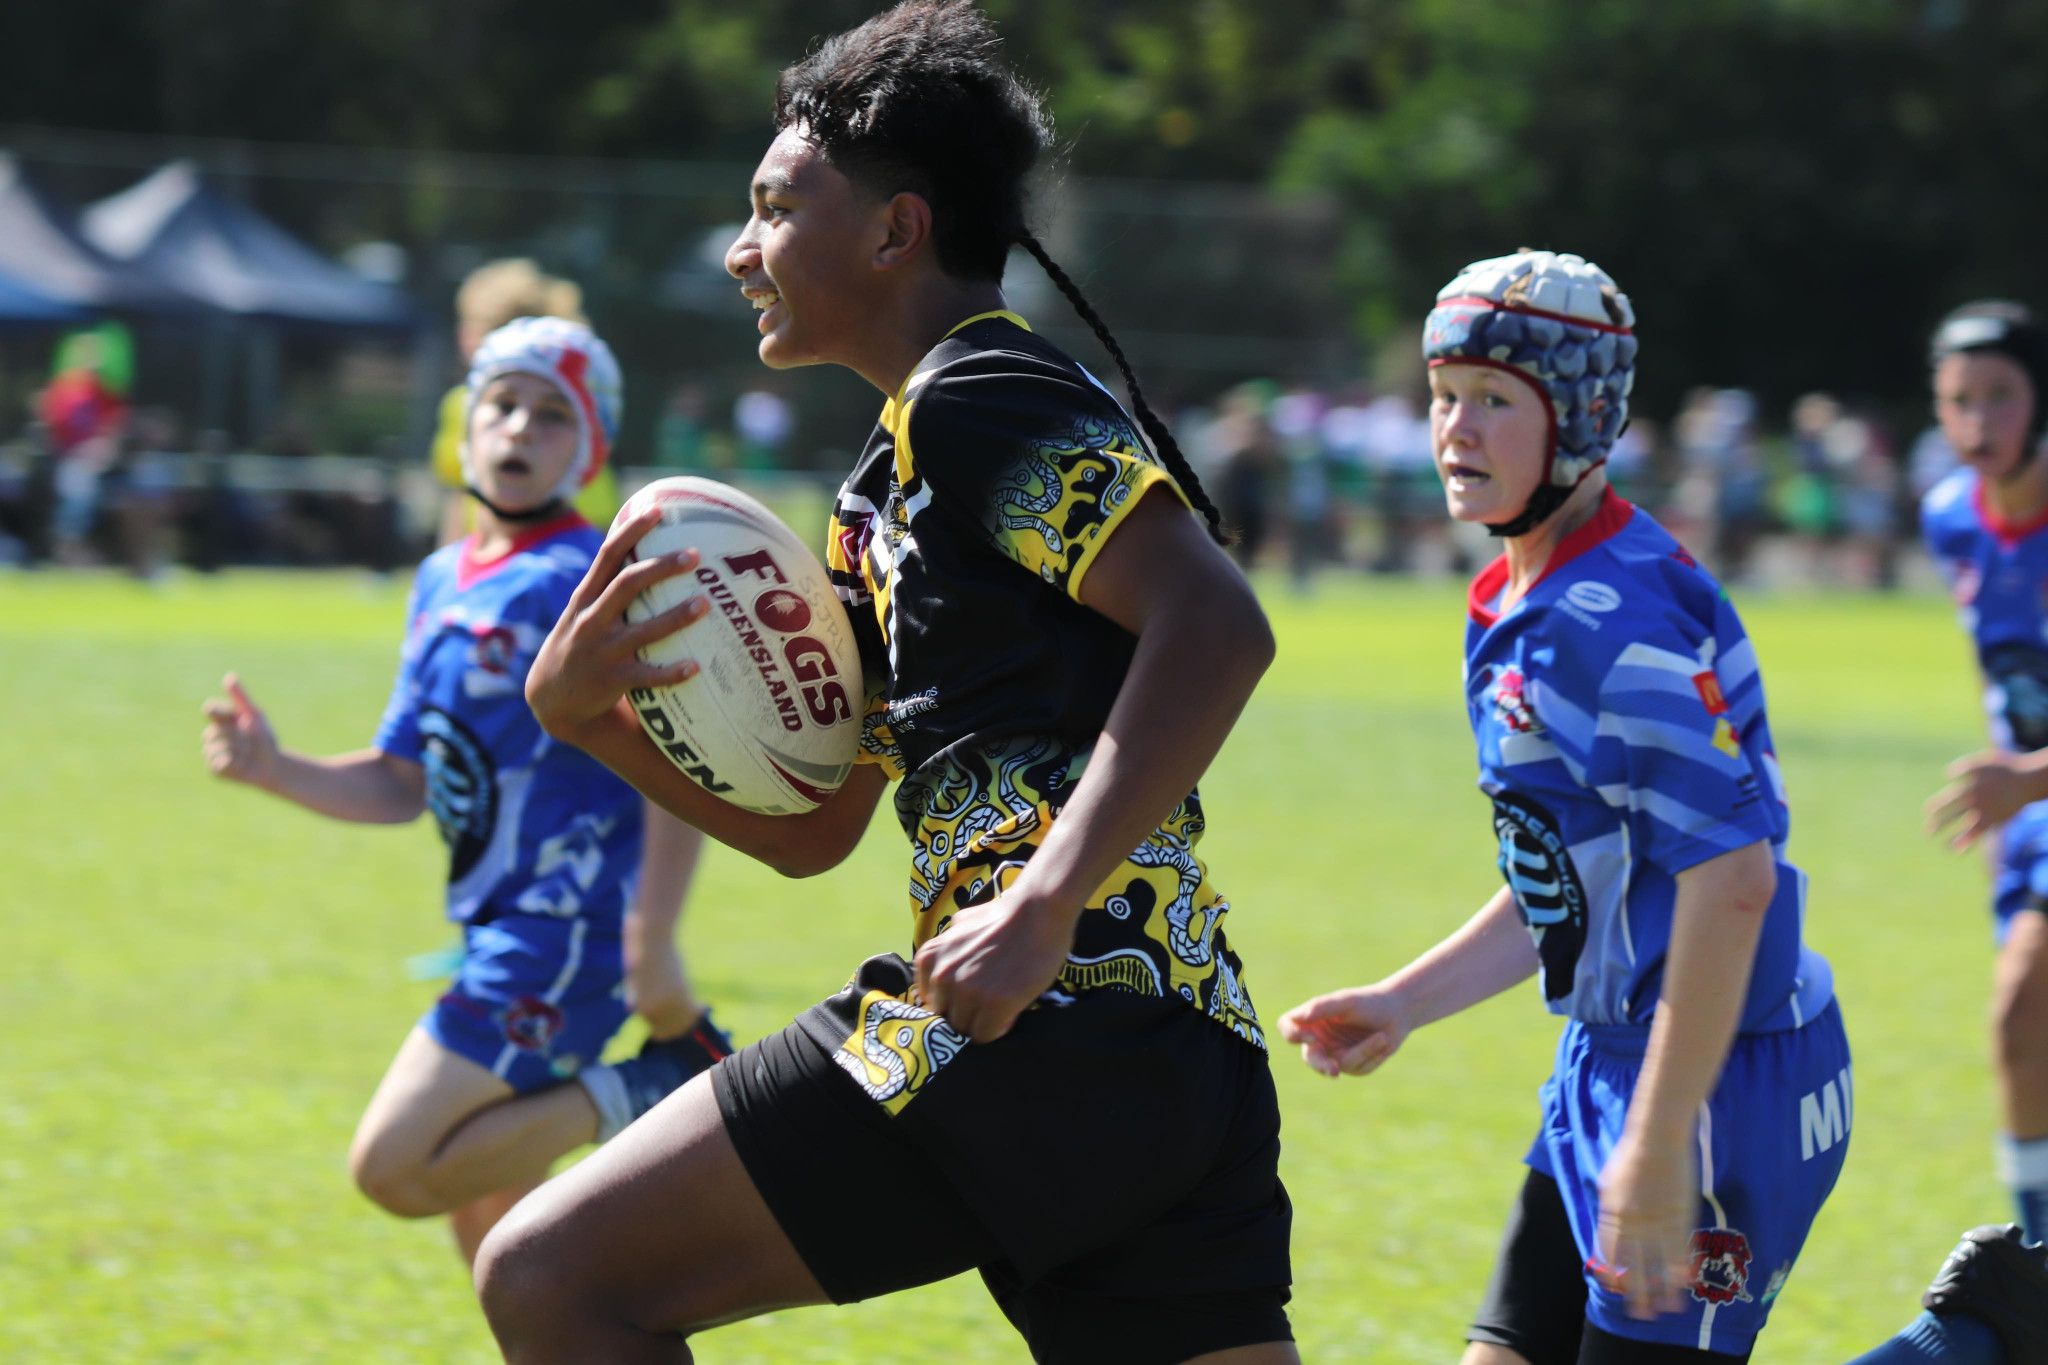 Iosefo Taateo runs with the ball for the Caboolture U13s in the Nate Myles Cup.